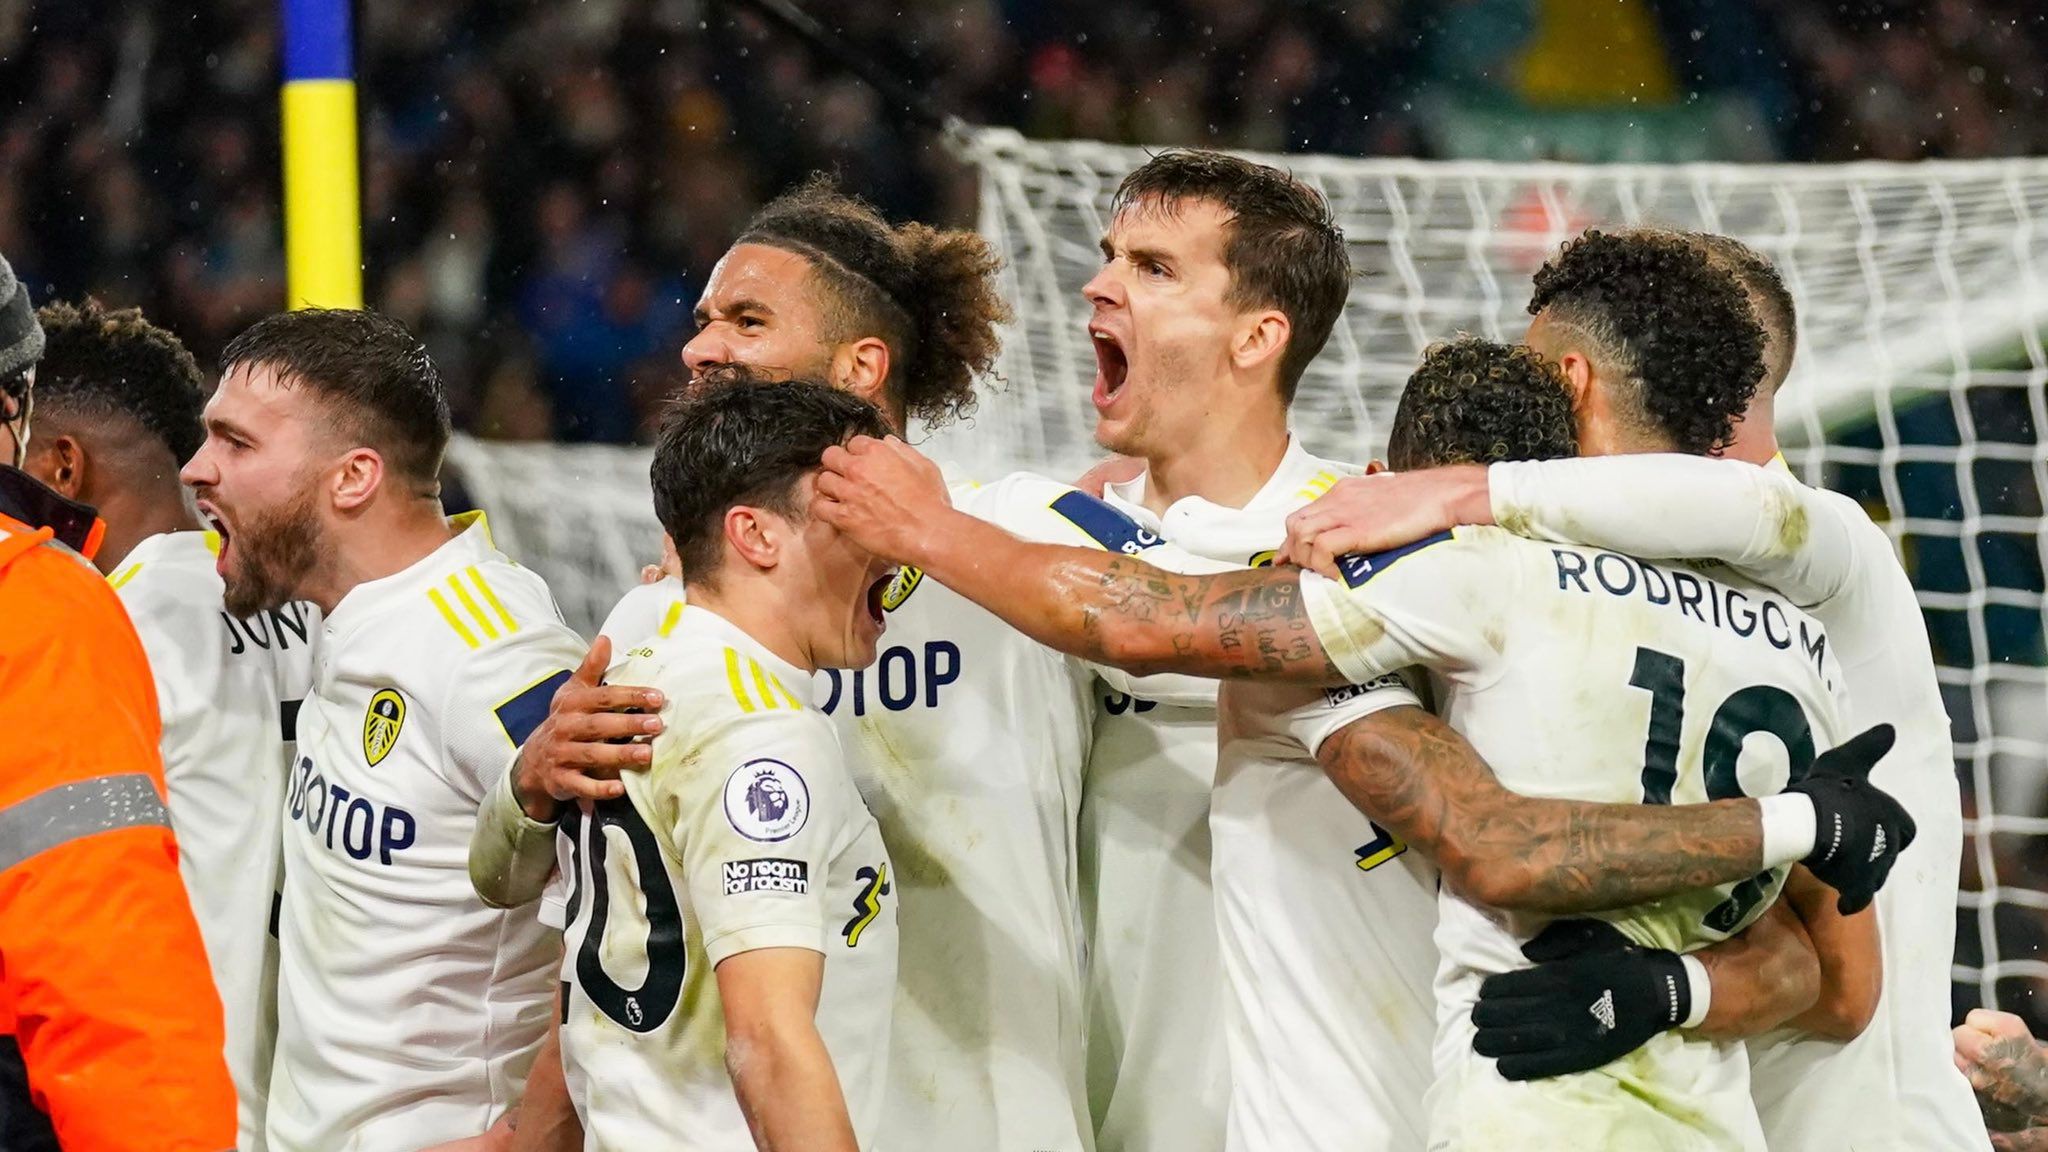 EPL: Late Raphinha penalty secures win for Leeds over Crystal Palace